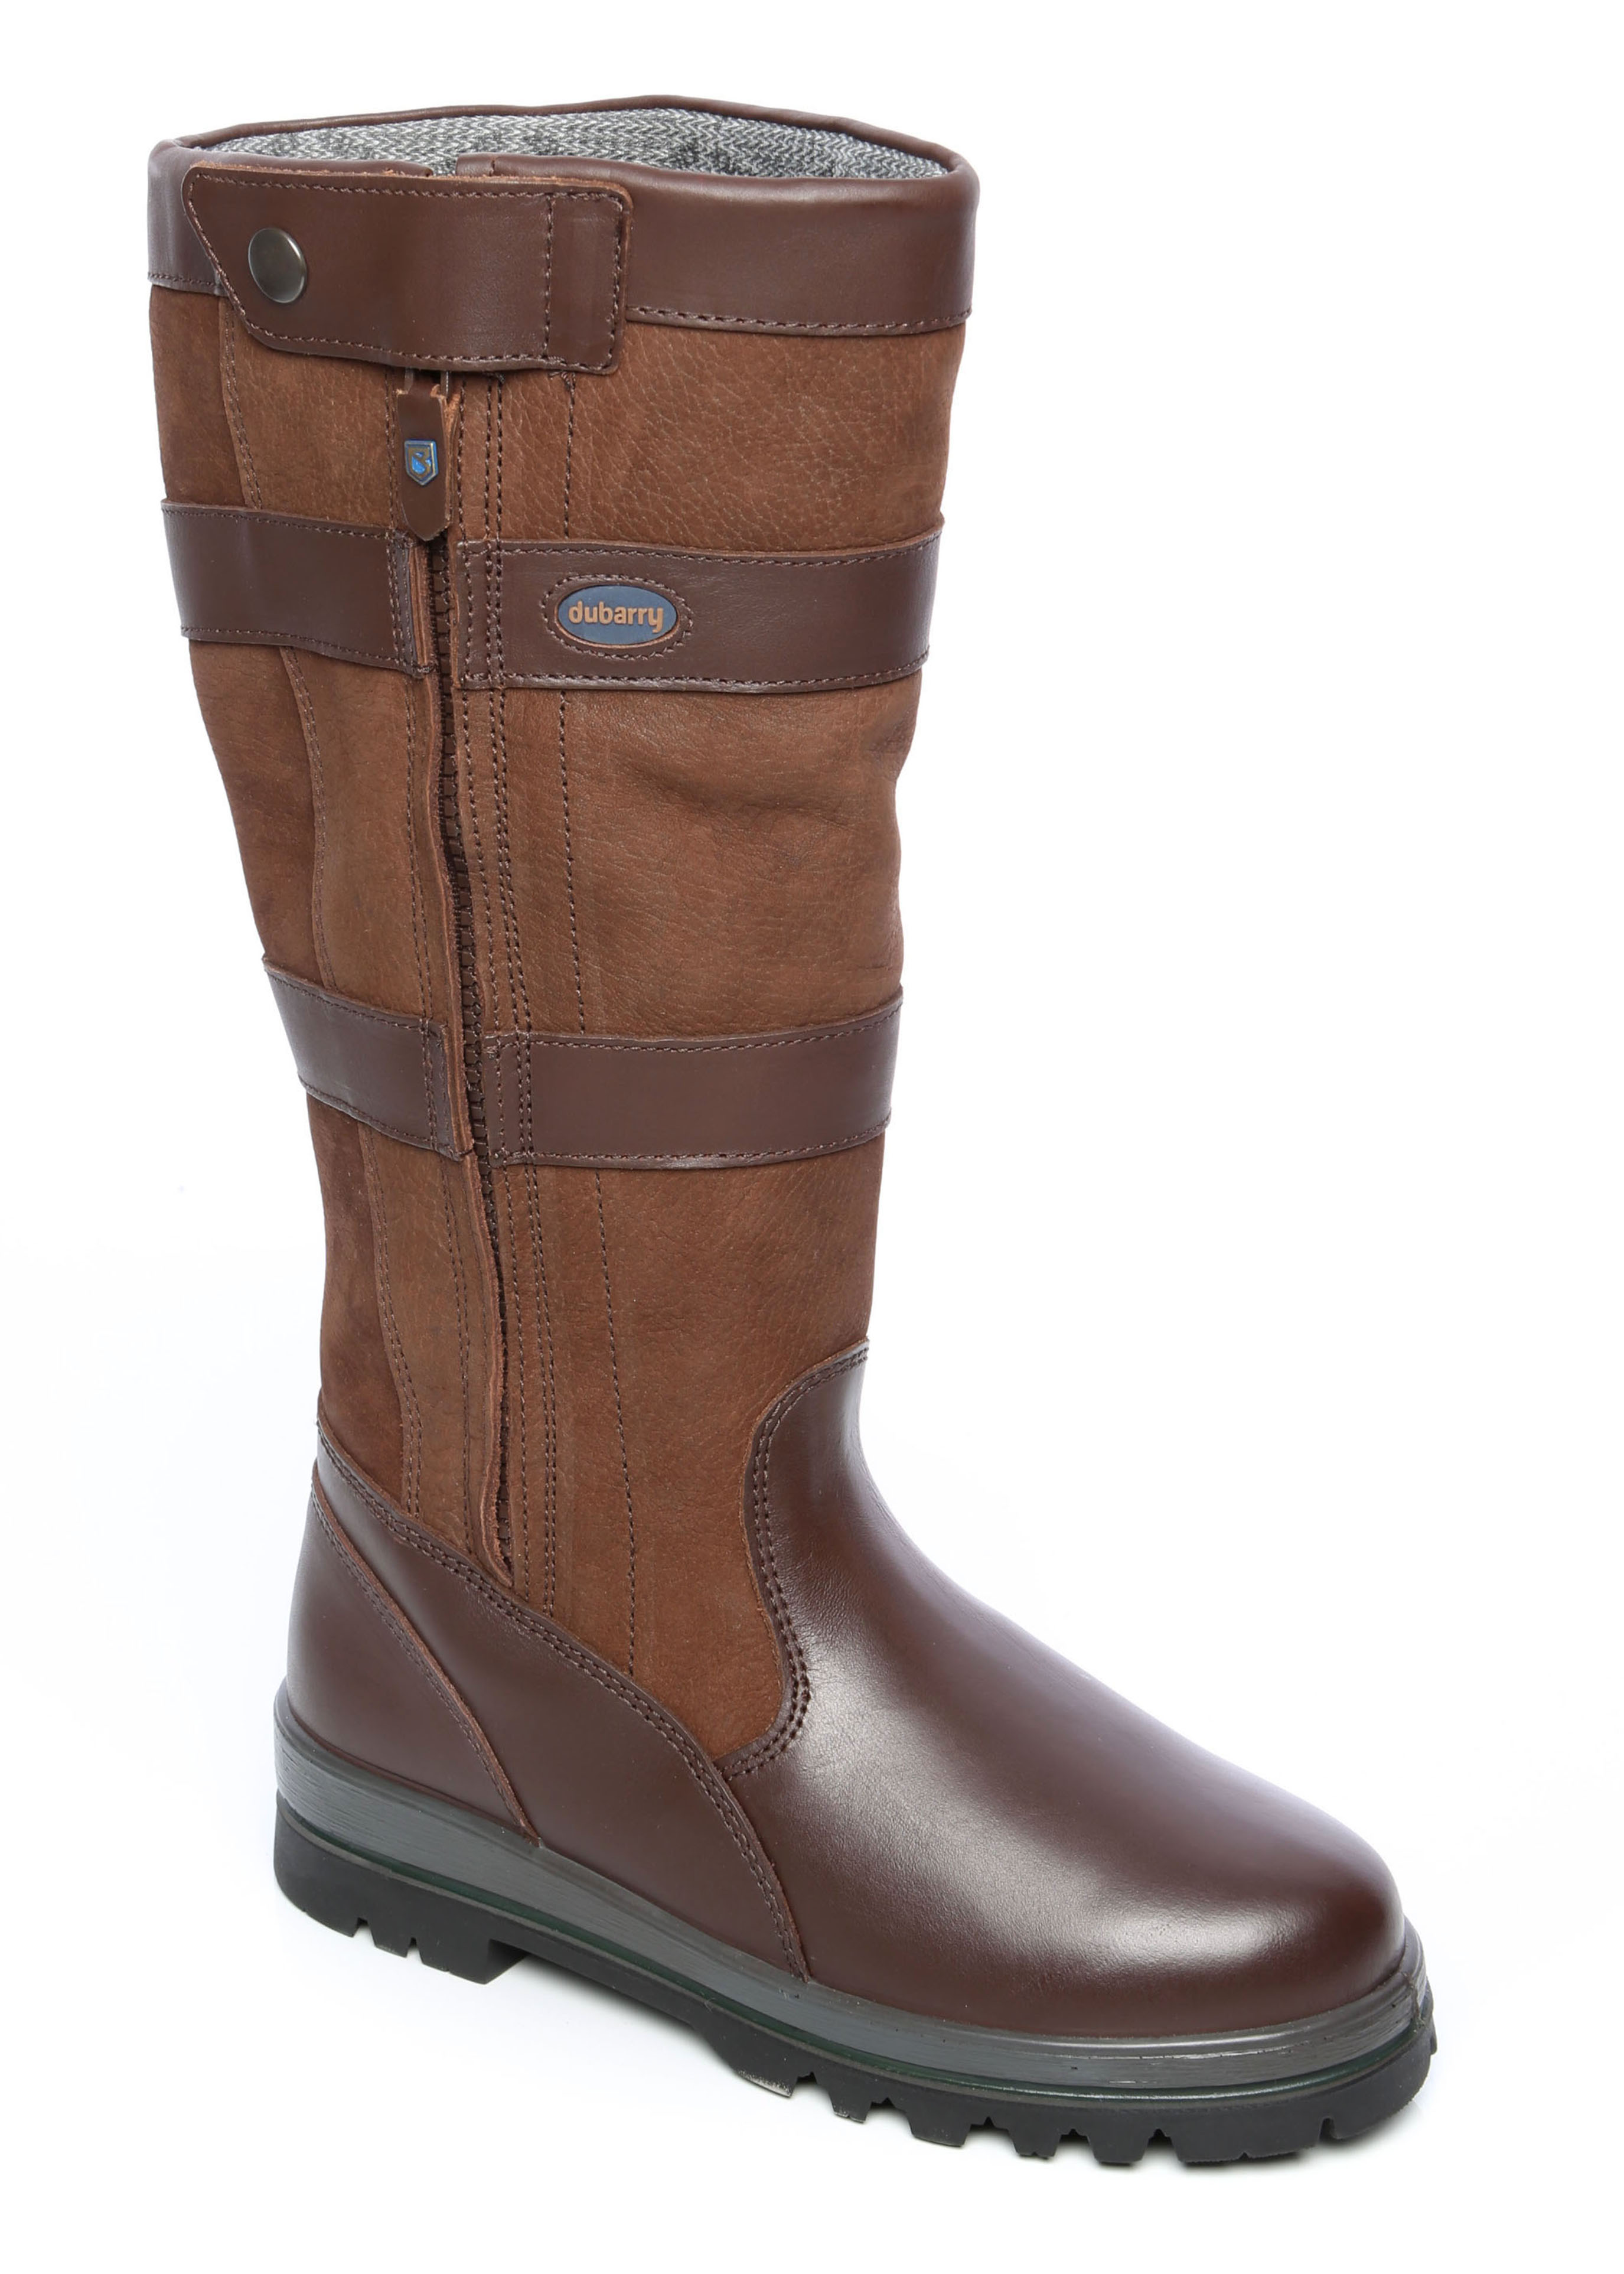 Dubarry Wexford Leather Boots